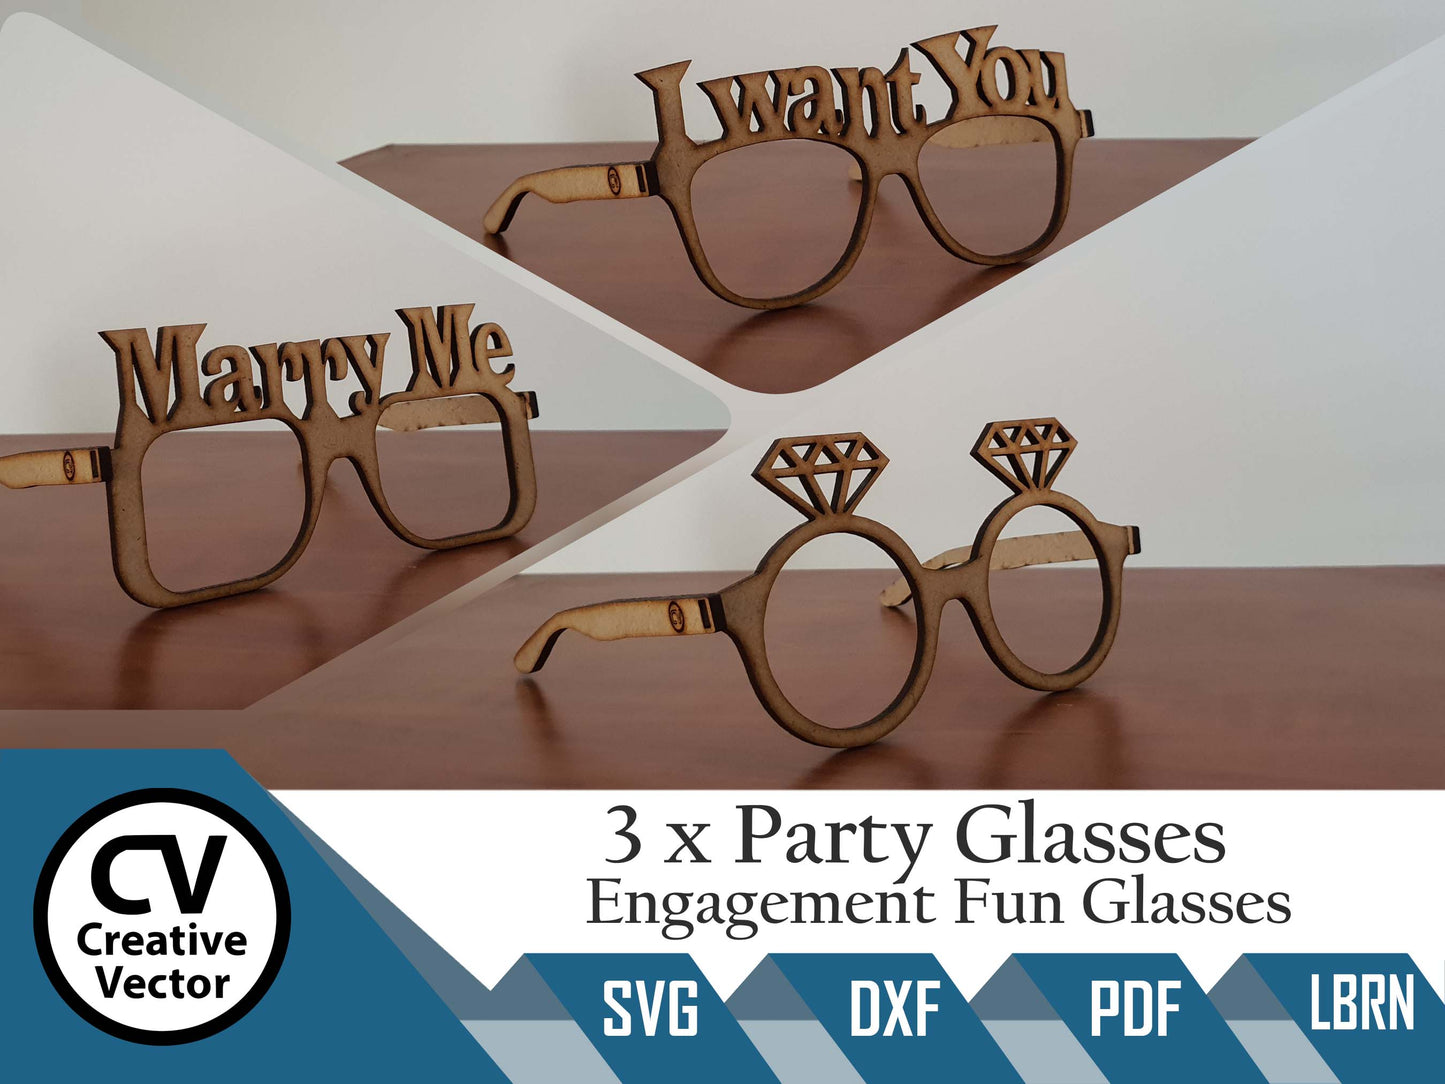 3 x Projects Engagement Fun Glasses